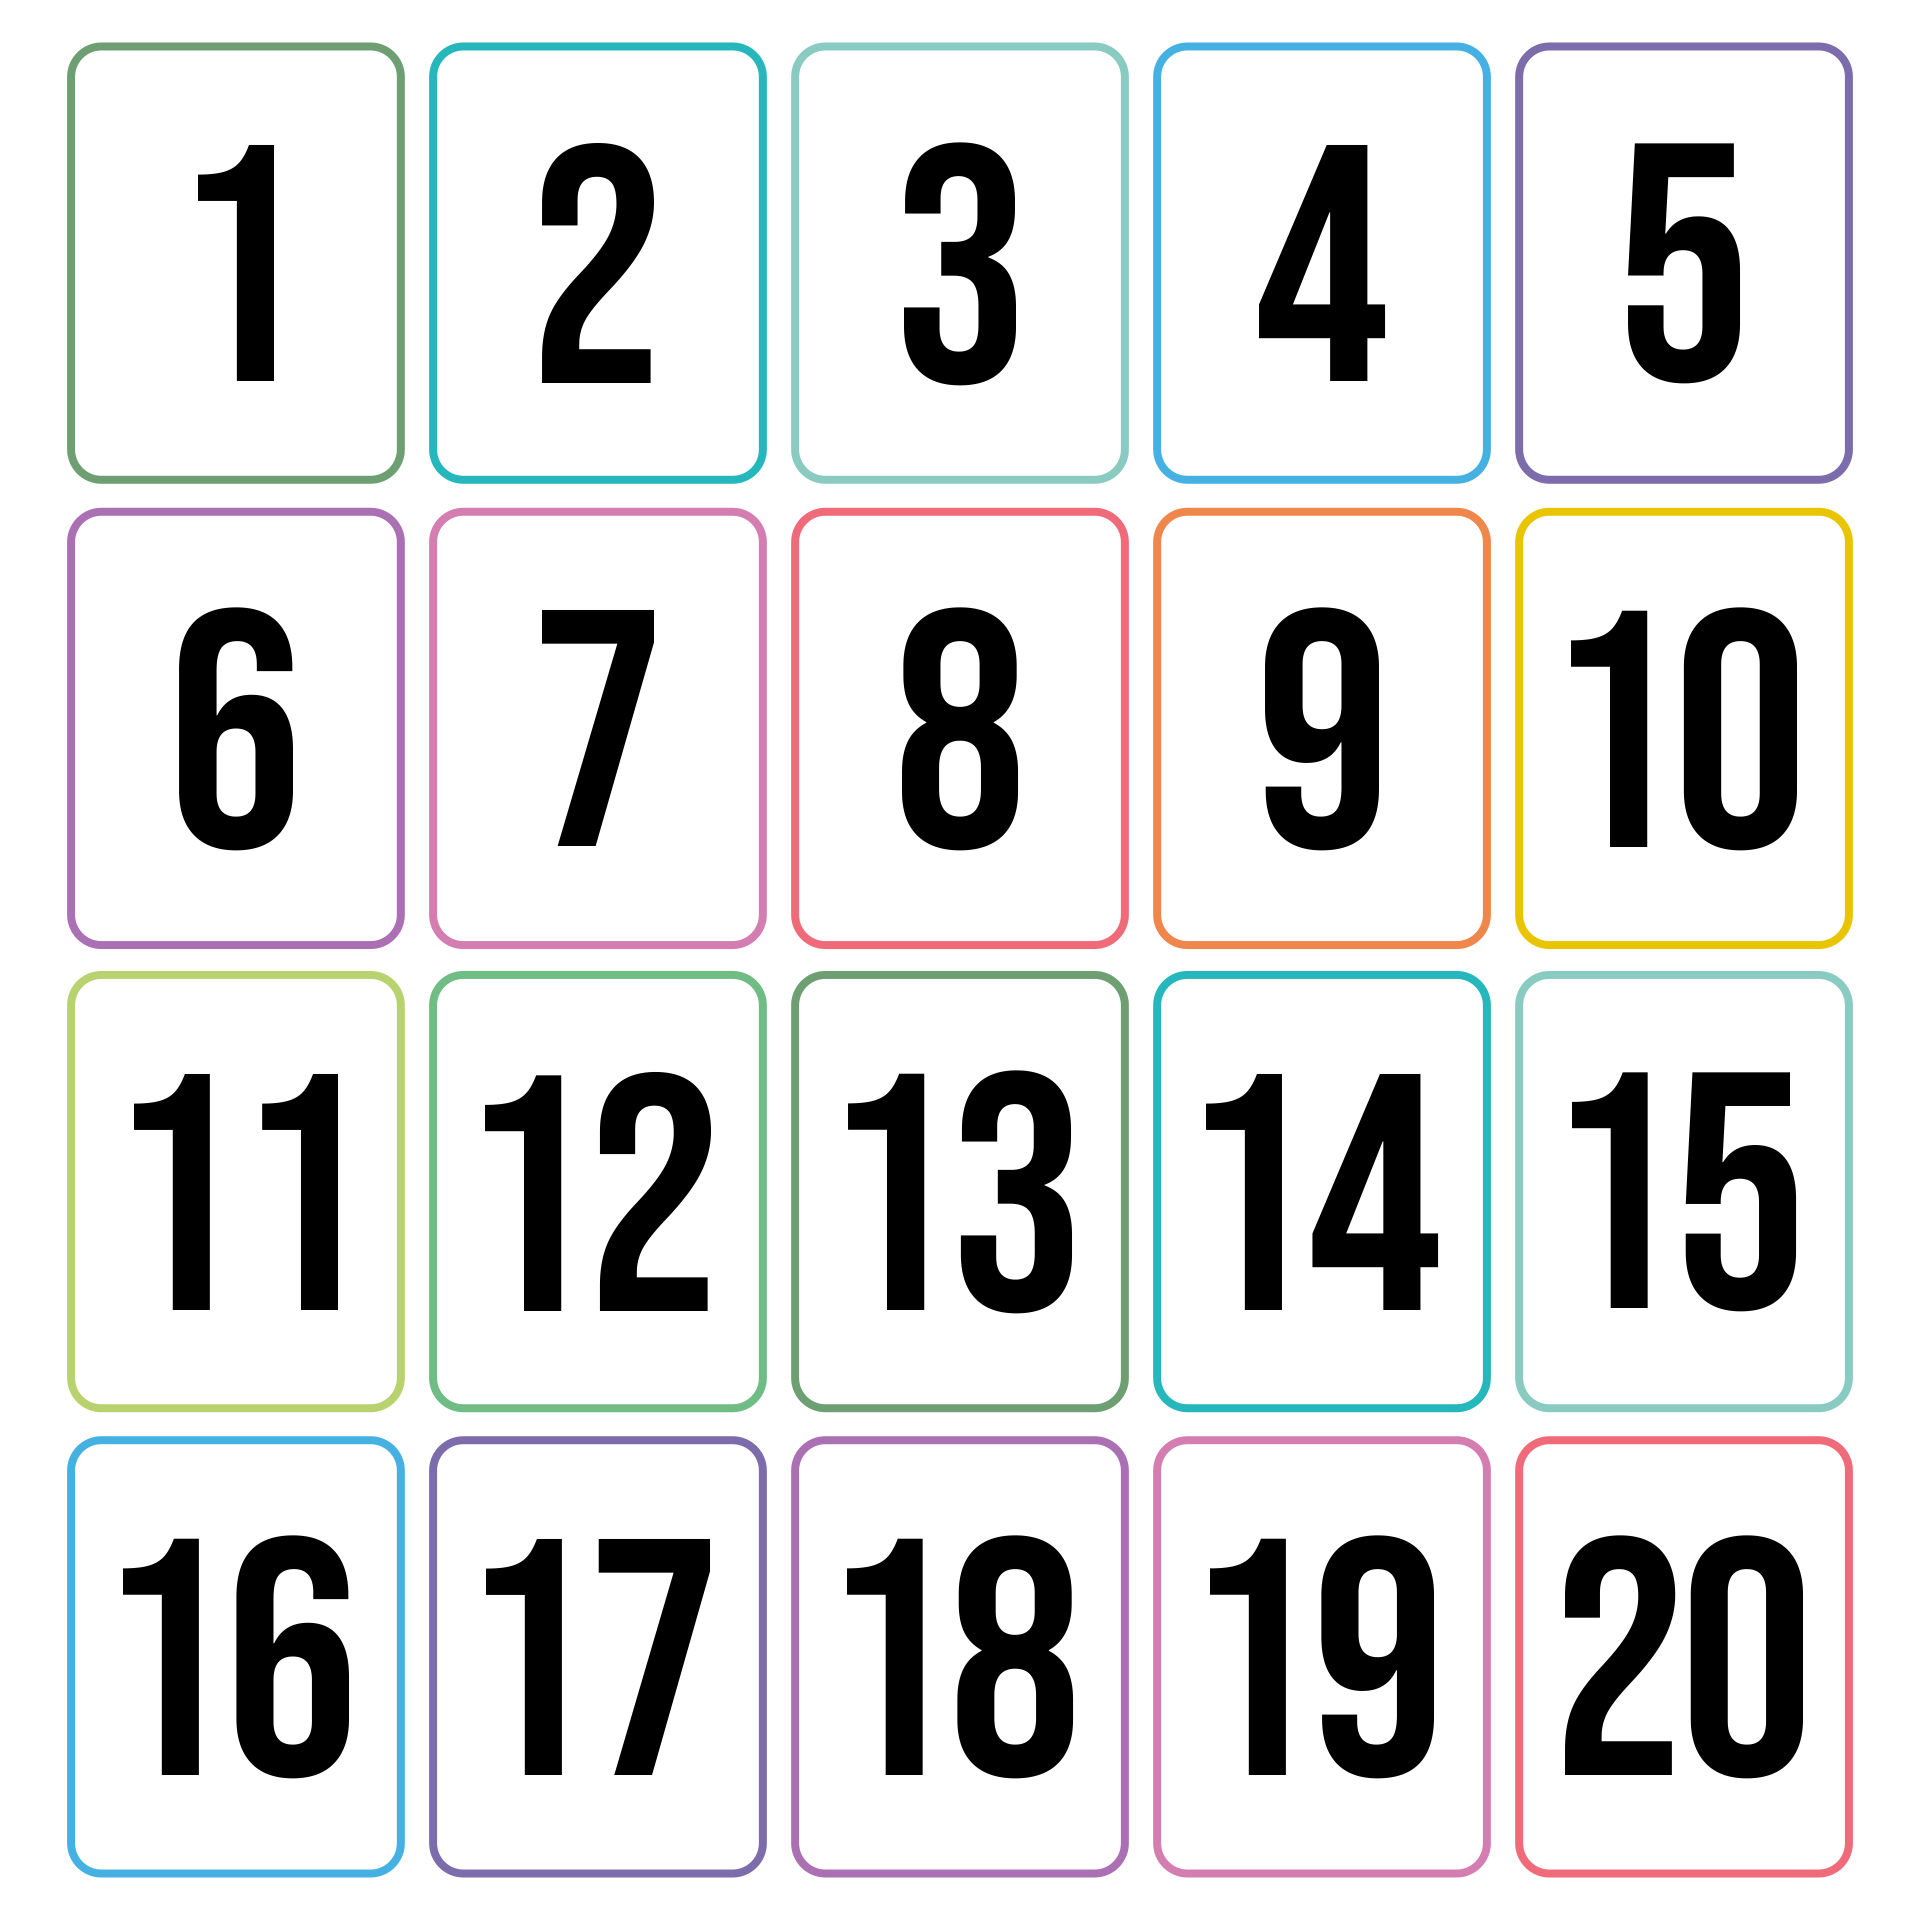 6 Best Images of Number Flashcards 1 30 Printable